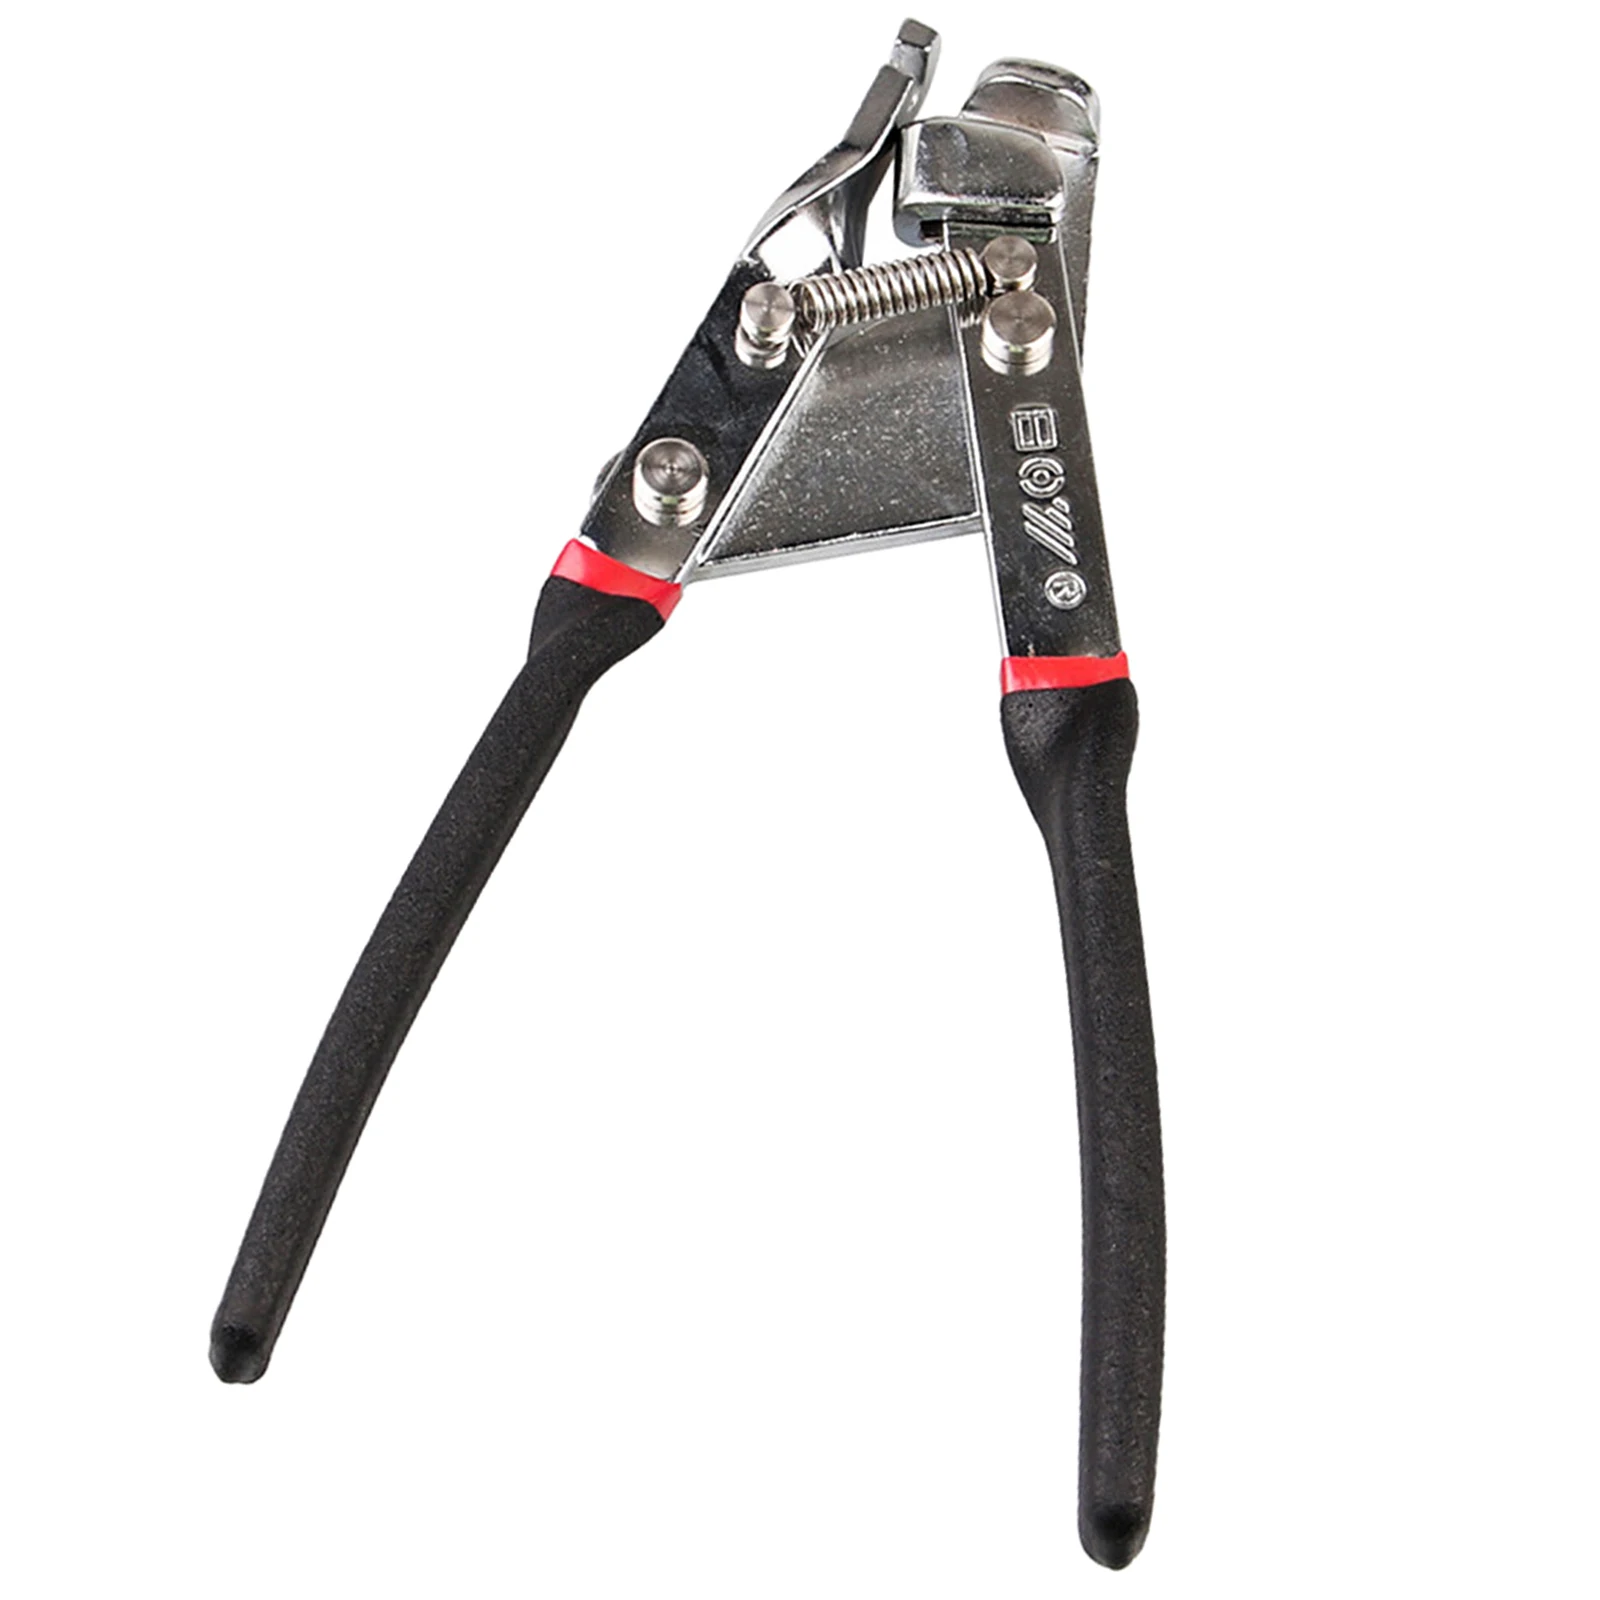 Bike Brake Cable Puller Link Hand Brake Tool Cables Cutting Wire Plier